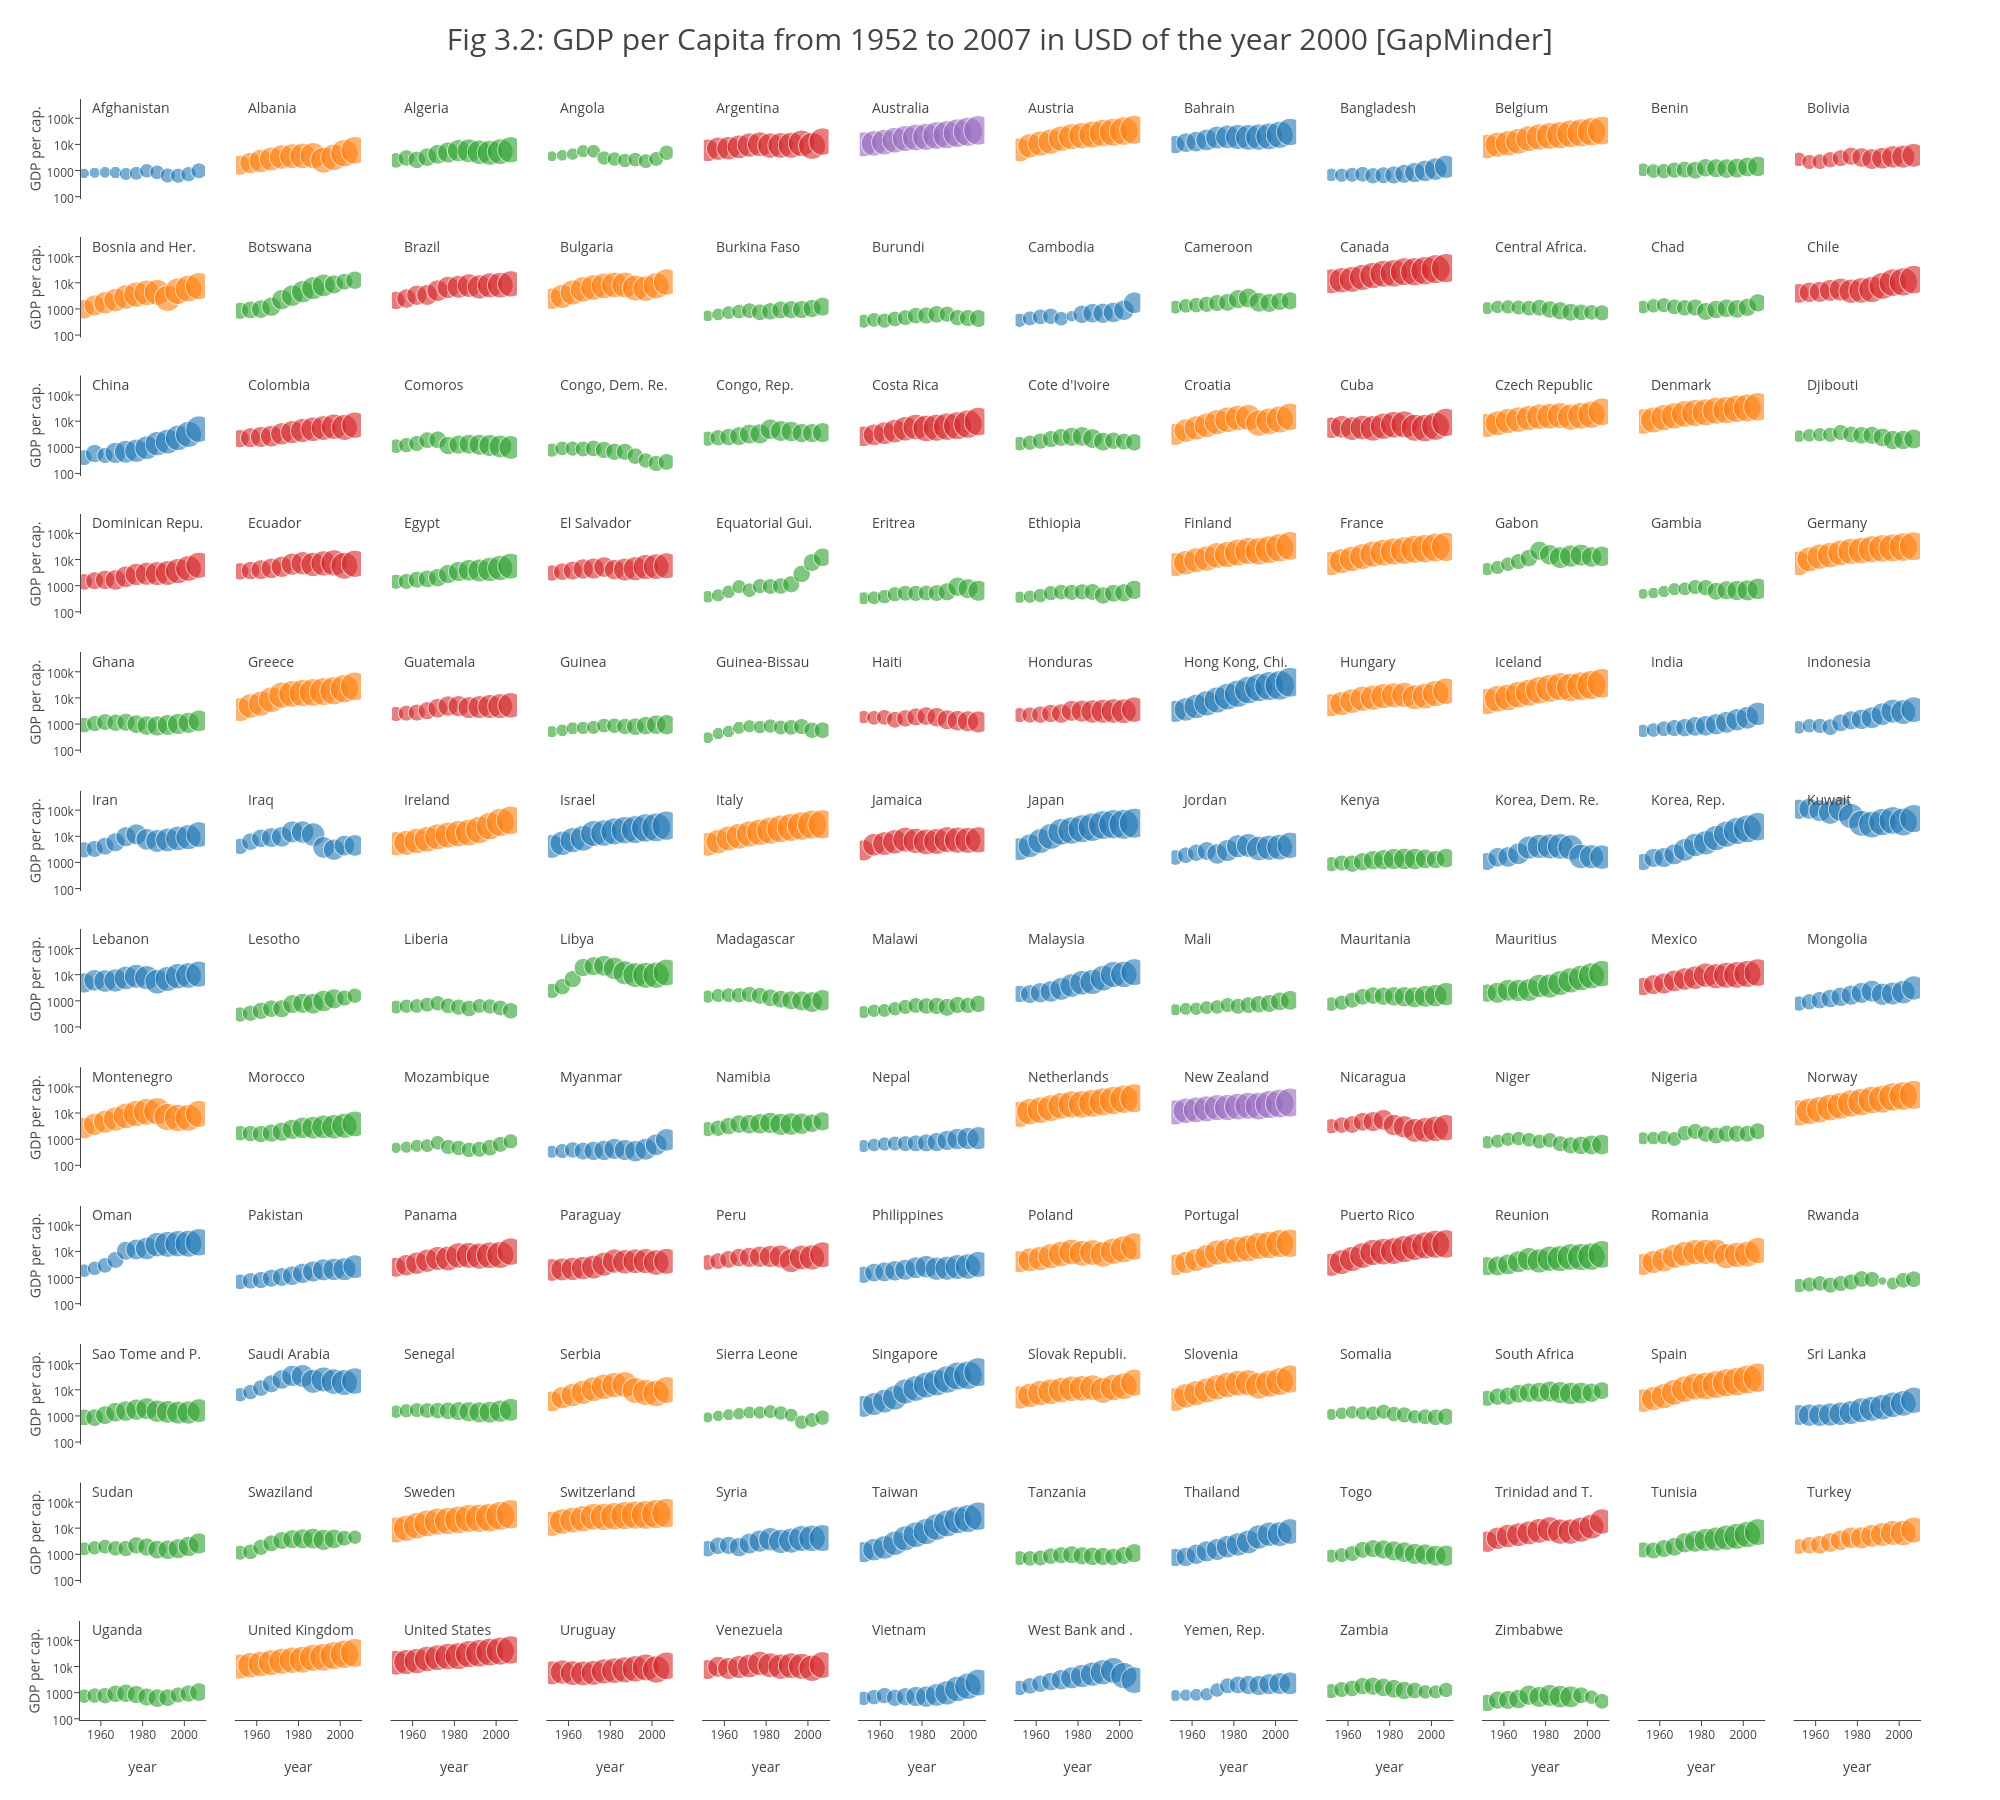 Fig 3.2: GDP per Capita from 1952 to 2007 in USD of the year 2000 [GapMinder] | scatter chart made by Etpinard | plotly